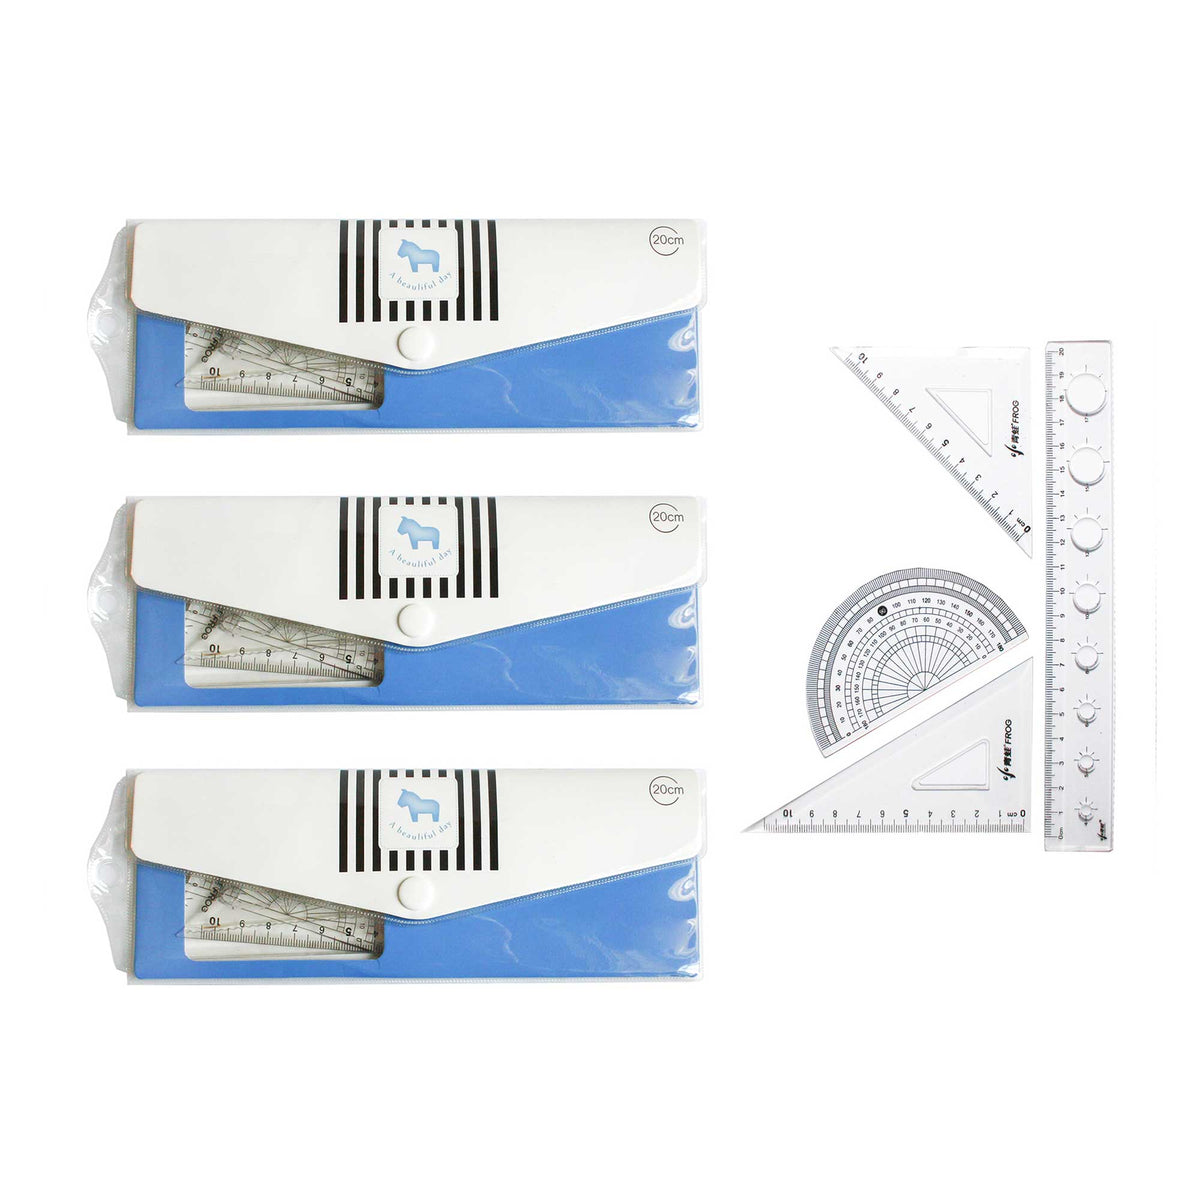 Geometry Set for Students - 20cm Ruler, Protractor, and Triangle Set (Blue, Pack of 3)